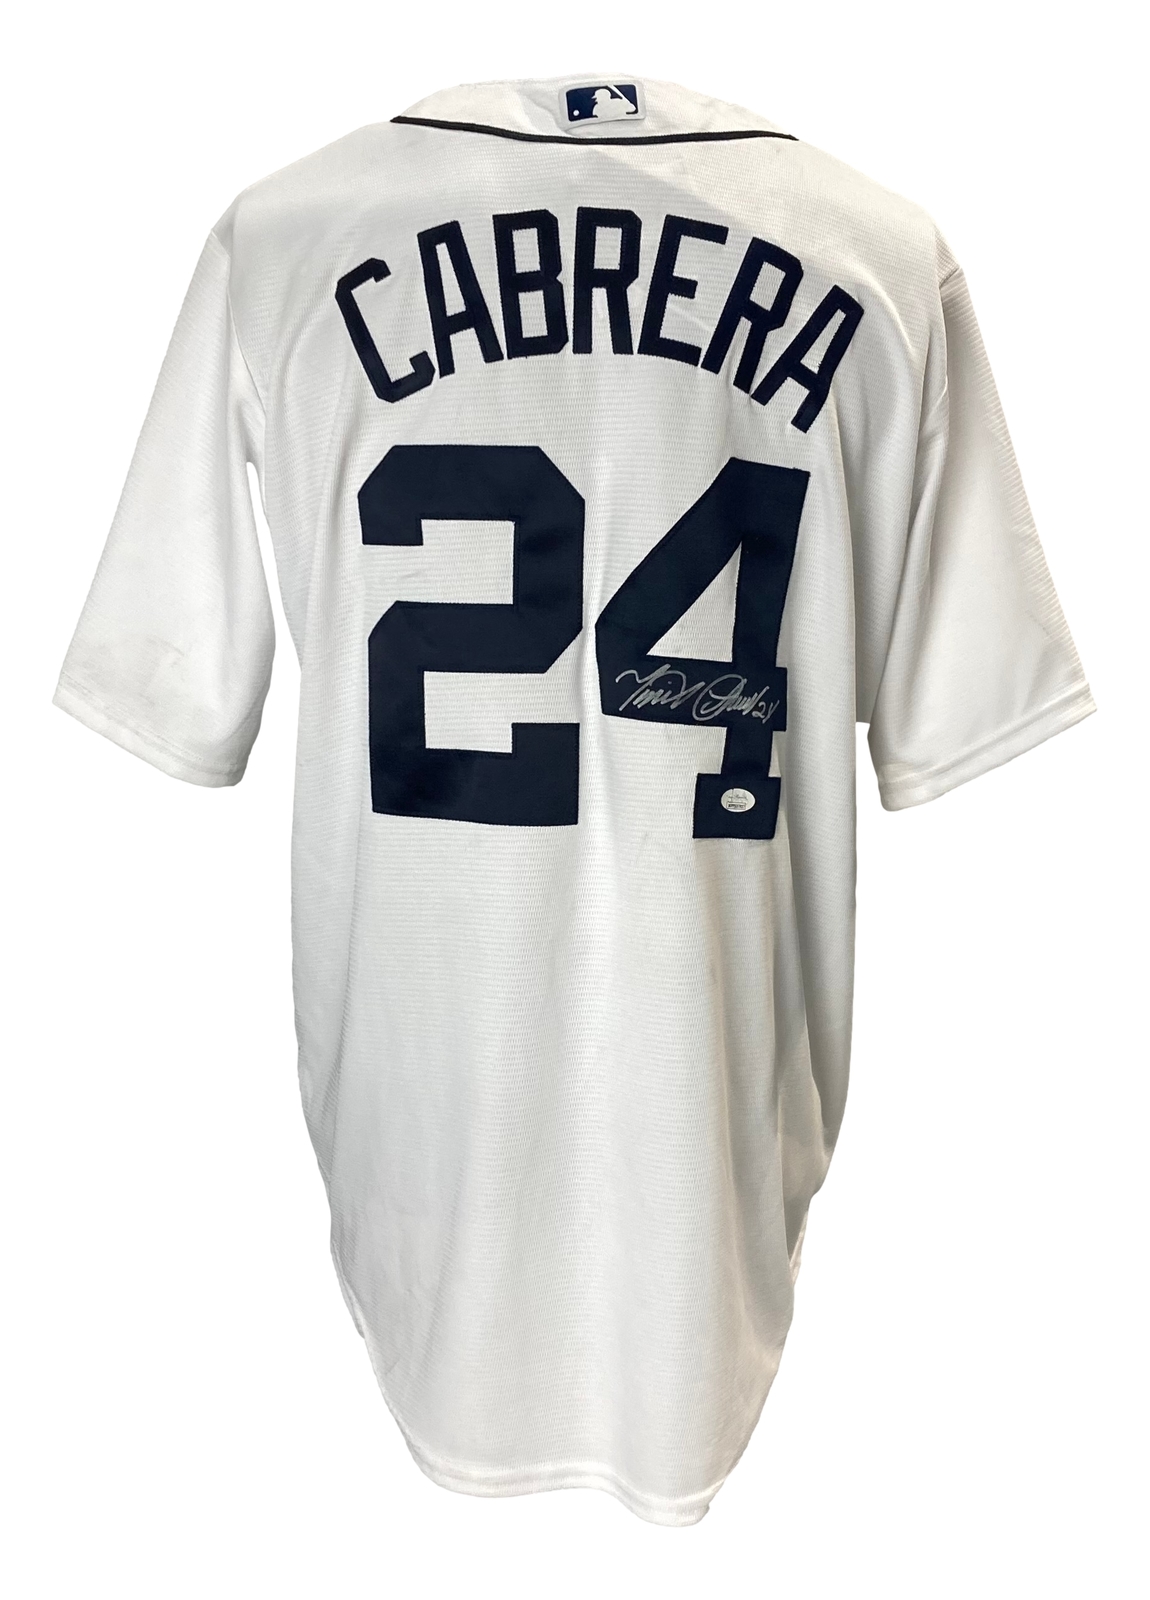 Primary image for Miguel Cabrera Signed Tigers White Majestic Cool Base Baseball Jersey JSA Holo